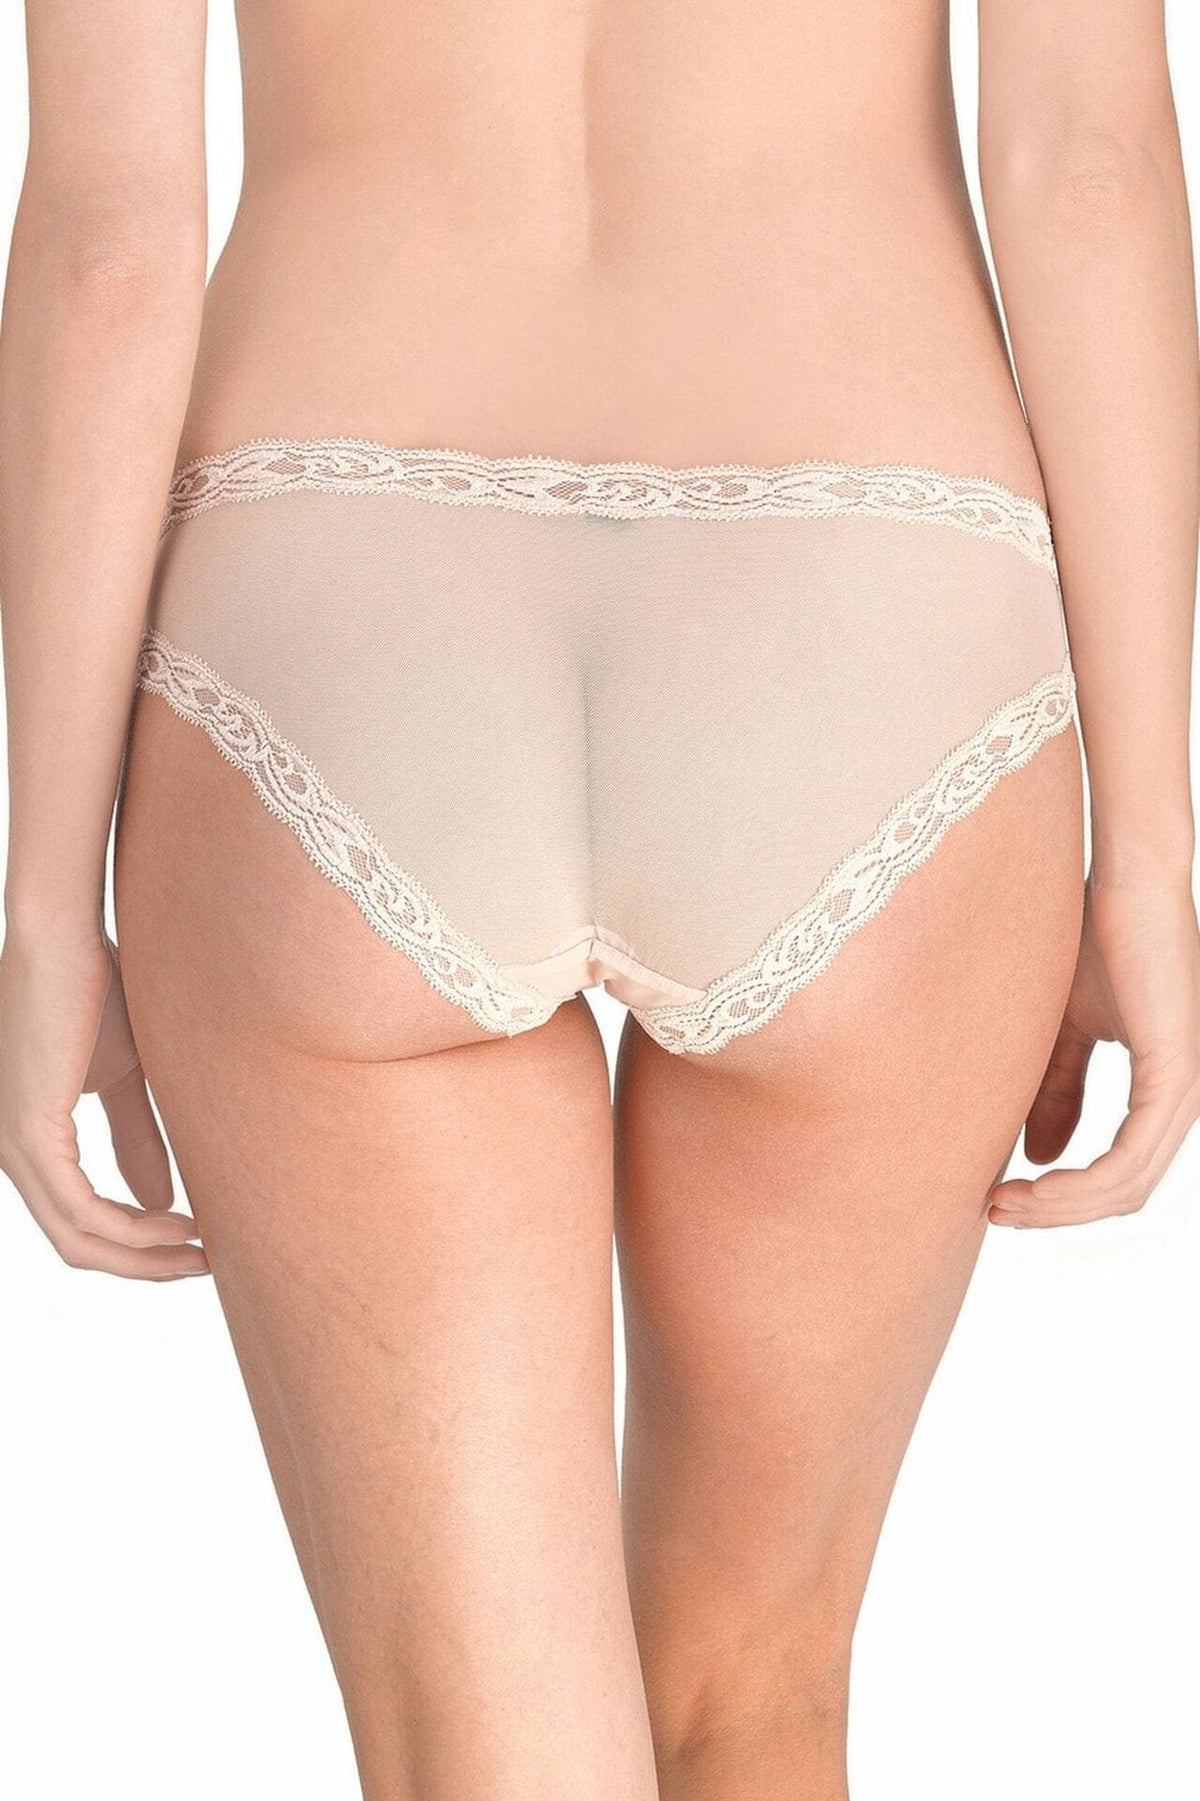 Natori Briefs Feathers Hipster - Cameo Rose